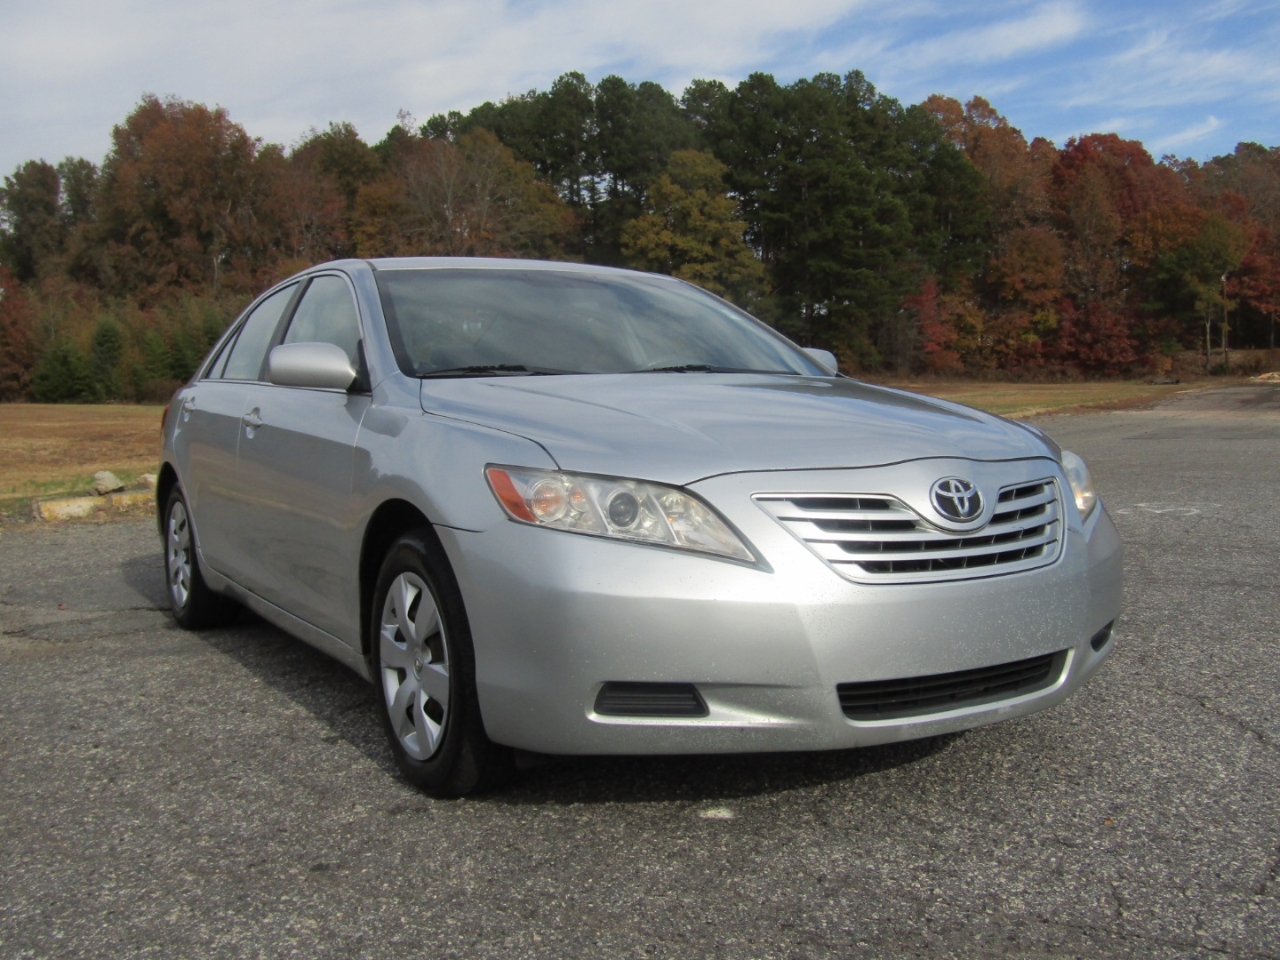 Used 2007 Toyota Camry CE 5-Spd AT for Sale in Kannapolis NC 28083 A ...